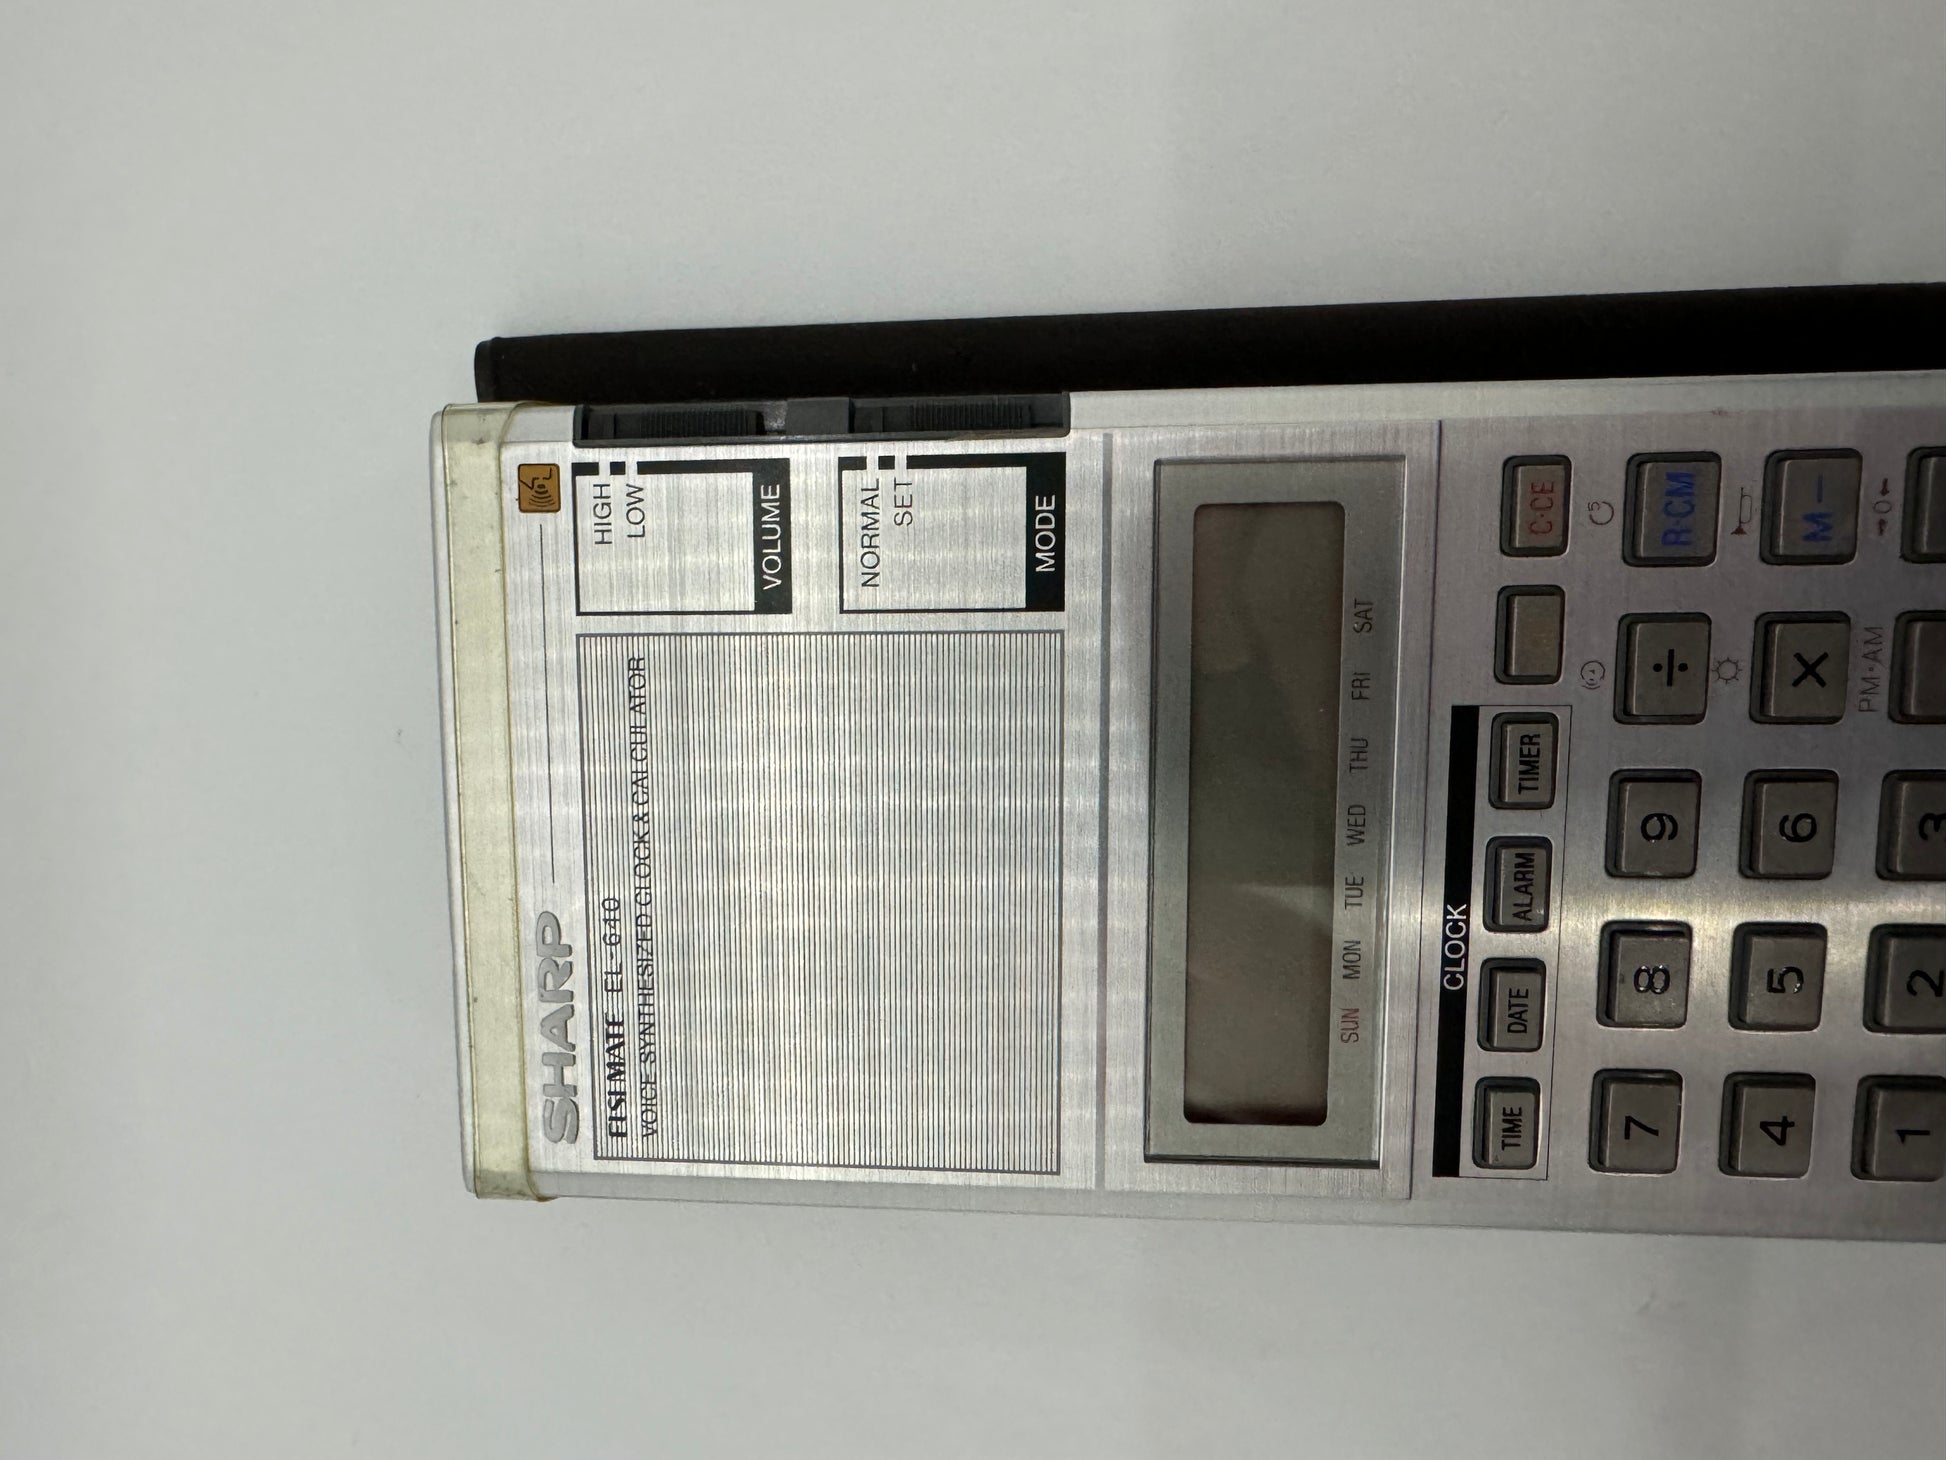 The picture shows a Sharp electronic organizer lying on a surface. The organizer has a silver color with a rectangular shape. On the left side, there is a speaker with a volume control slider above it labeled "HIGH" at the top and "LOW" at the bottom. The speaker has horizontal lines across it. On the right side of the organizer, there is a keypad with various buttons. Above the keypad, there is a rectangular screen which seems to be off as nothing is displayed on it. Above the screen, there is 